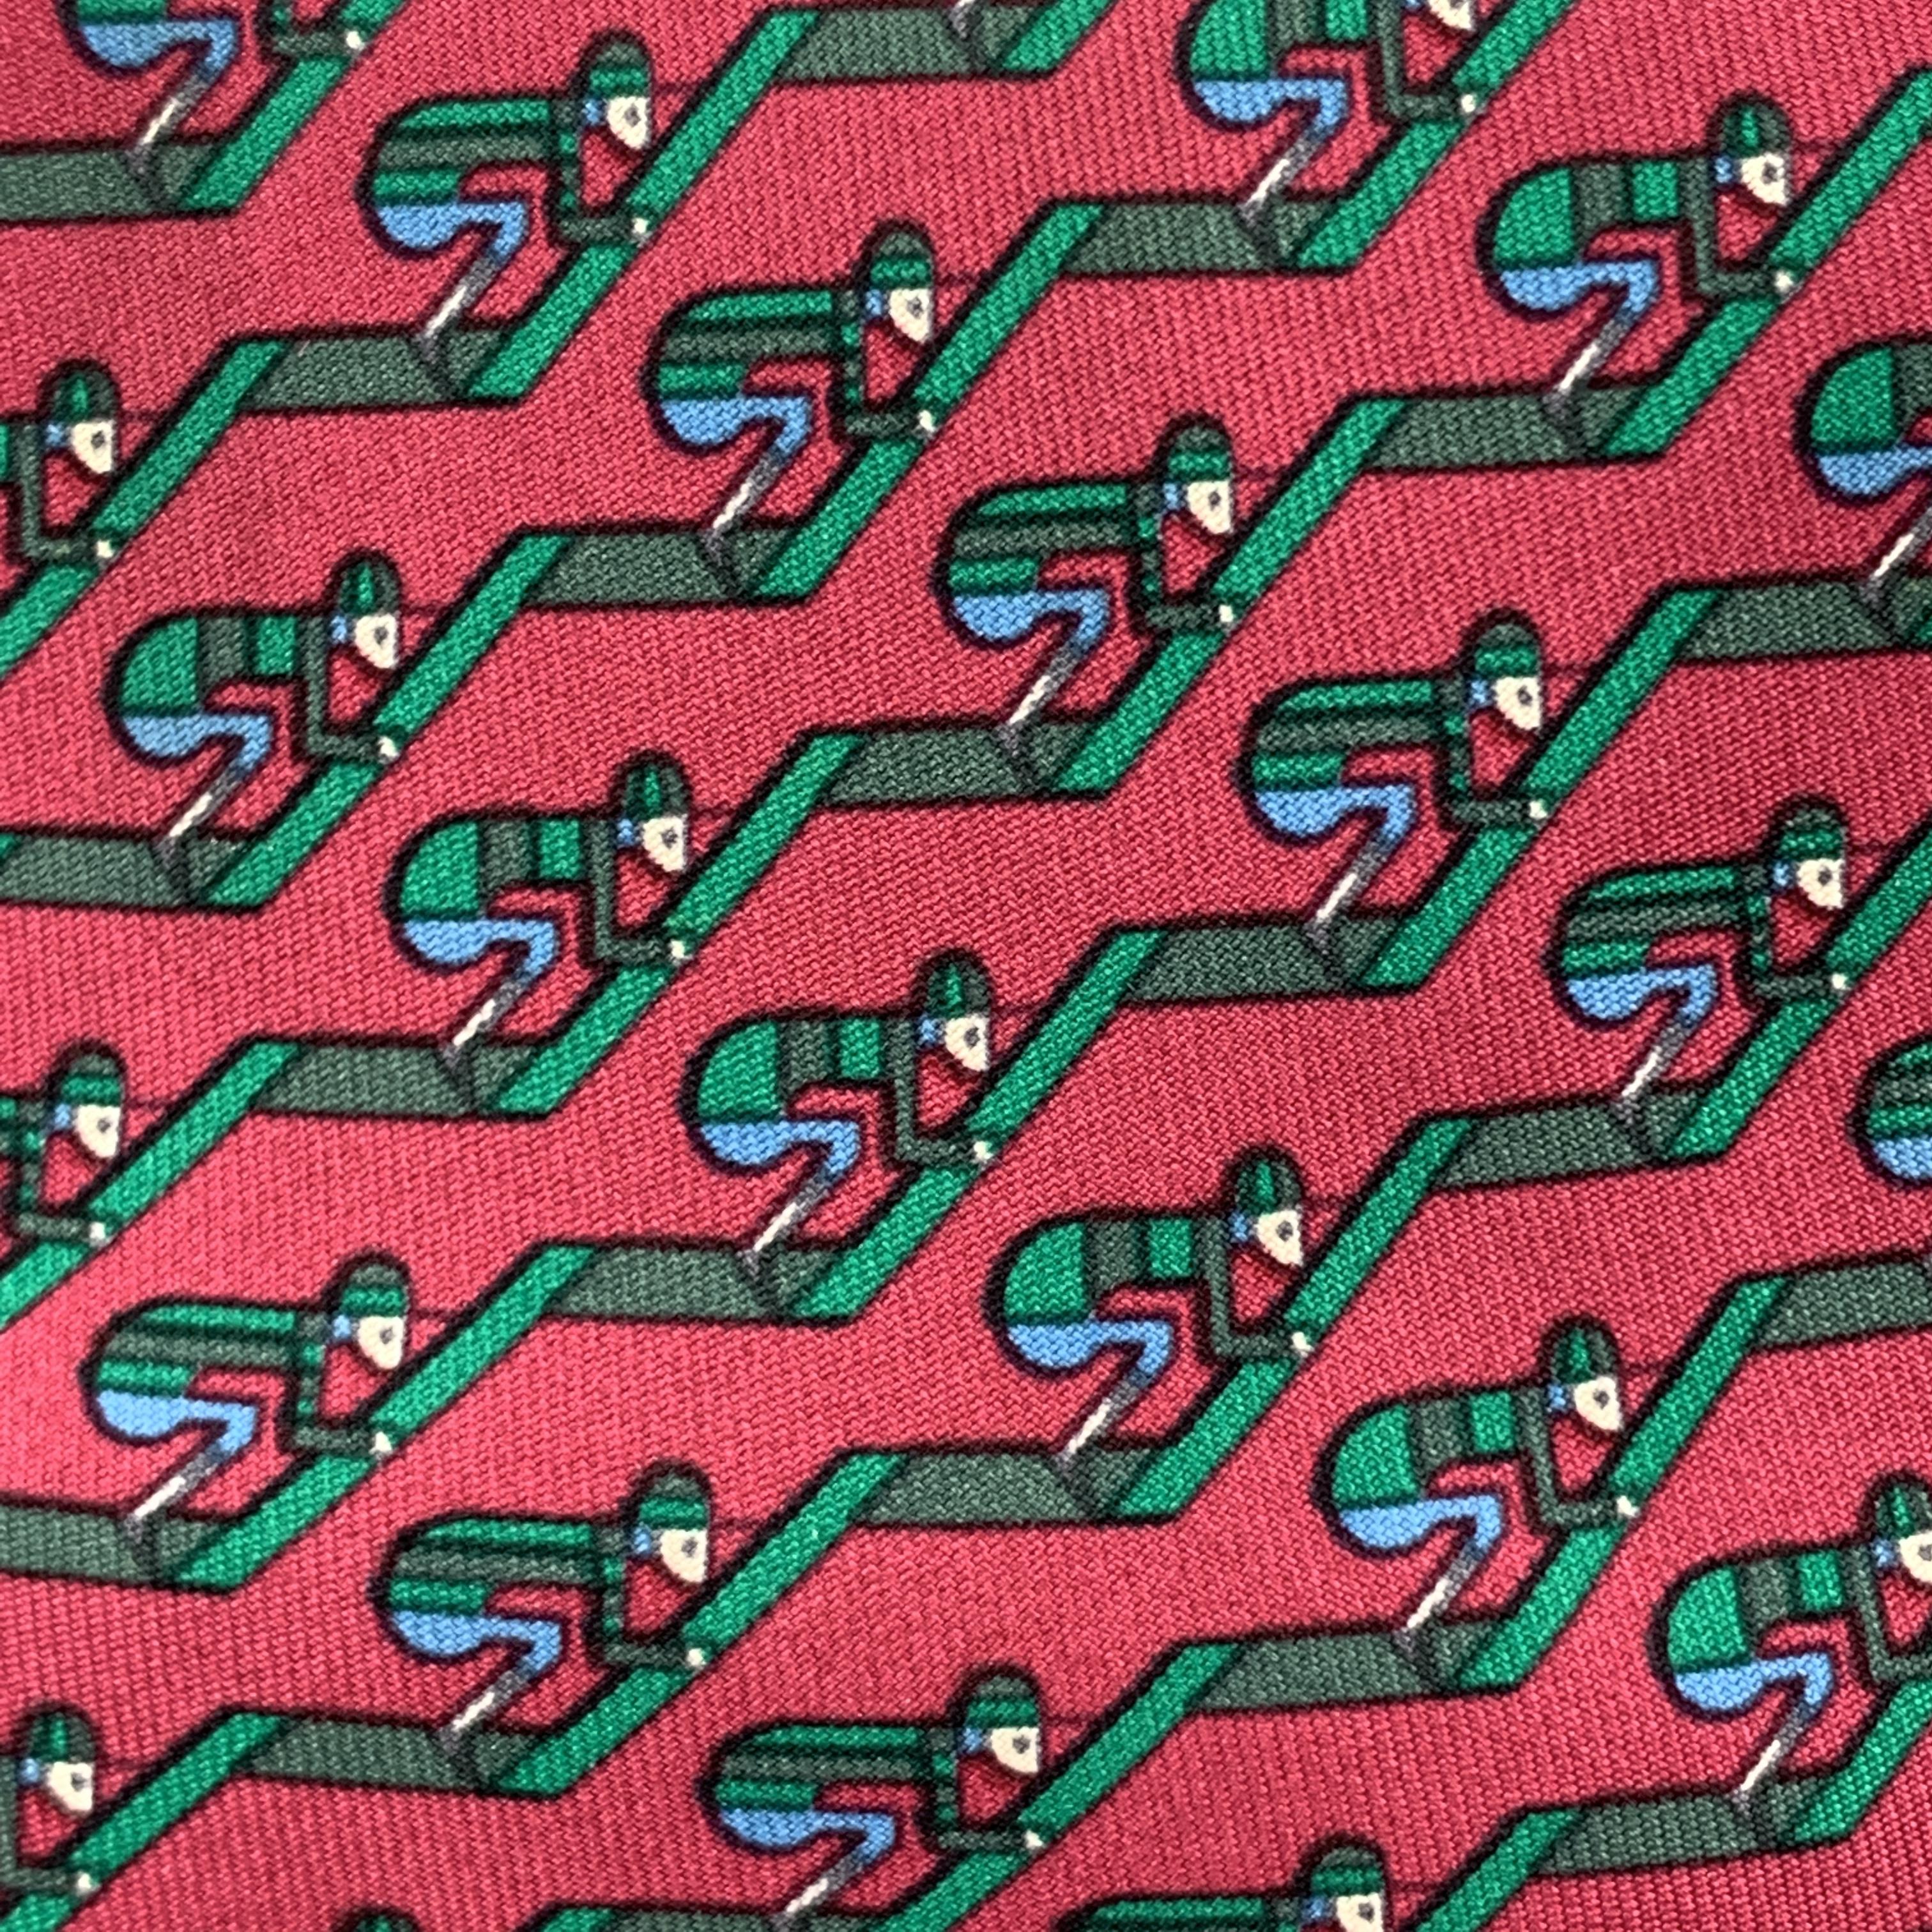 HERMES necktie comes in burgundy silk twill with all over green jockey stripe print. Made in France.

Excellent Pre-Owned Condition.

Width: 3.25 in. 